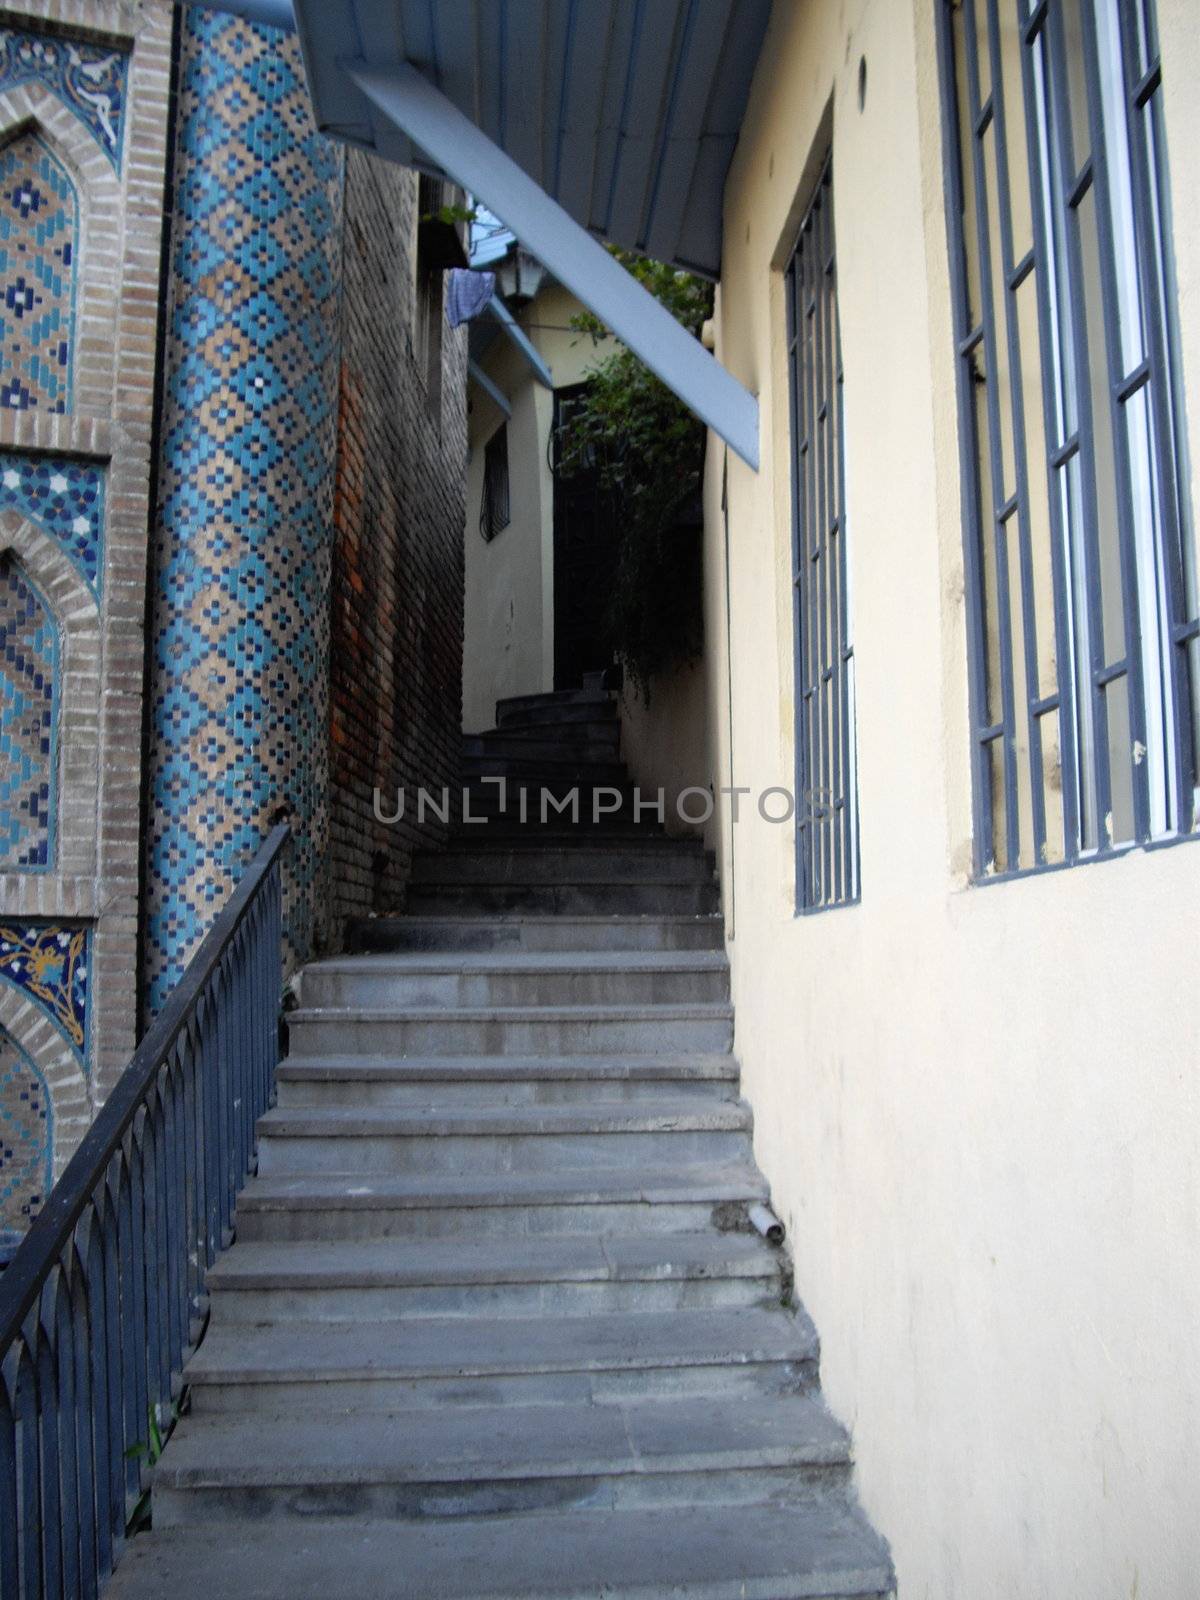 Stairs in the old town of Tbilisi